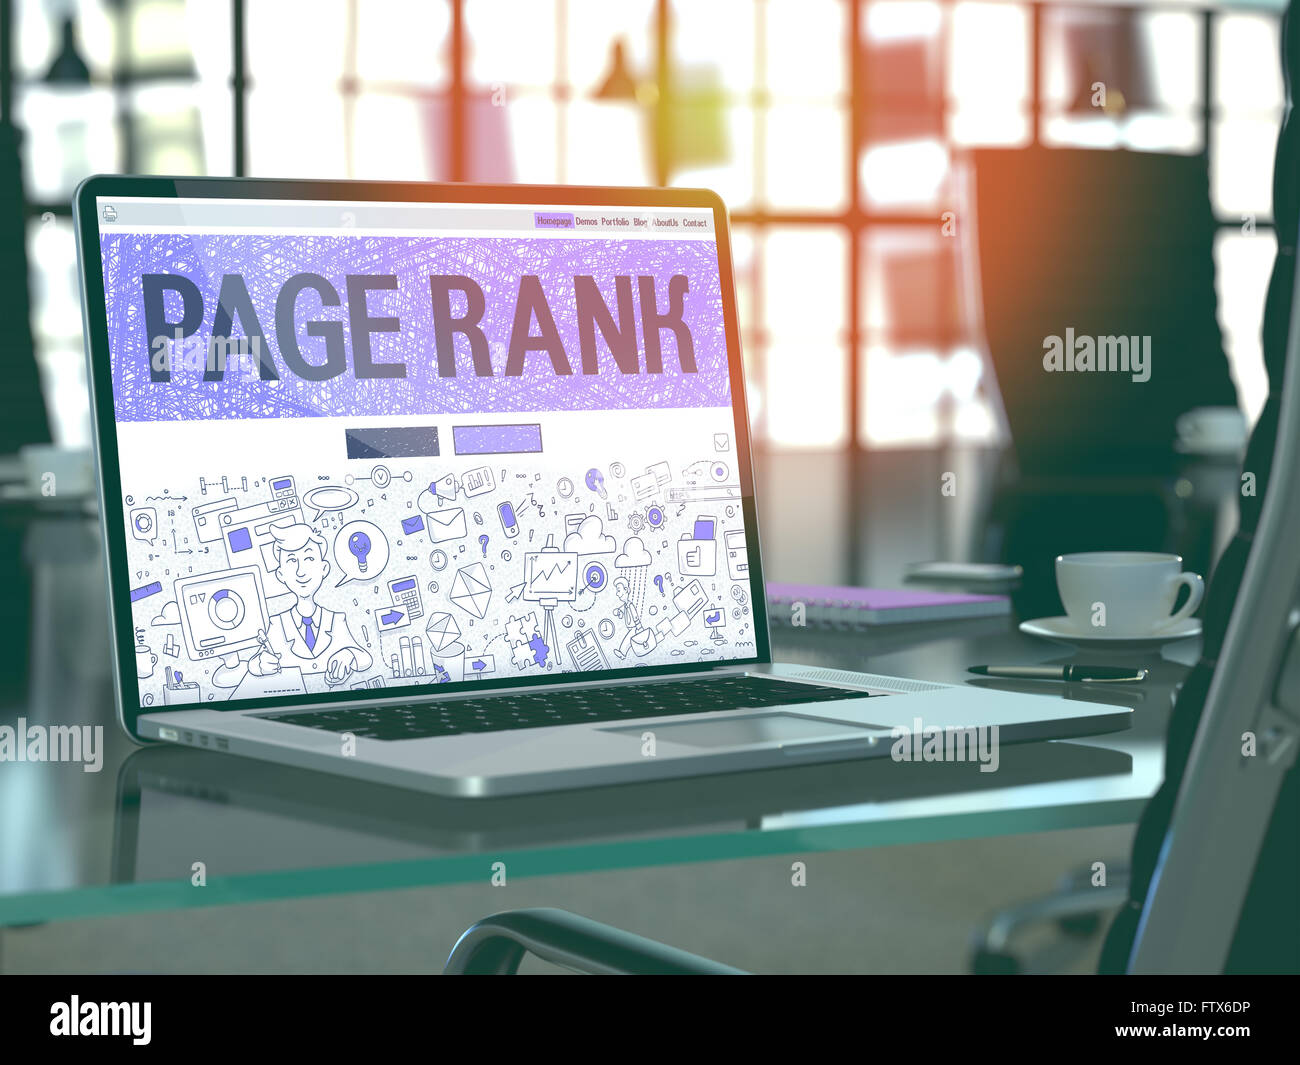 Page Rank on Laptop in Modern Workplace Background. Stock Photo